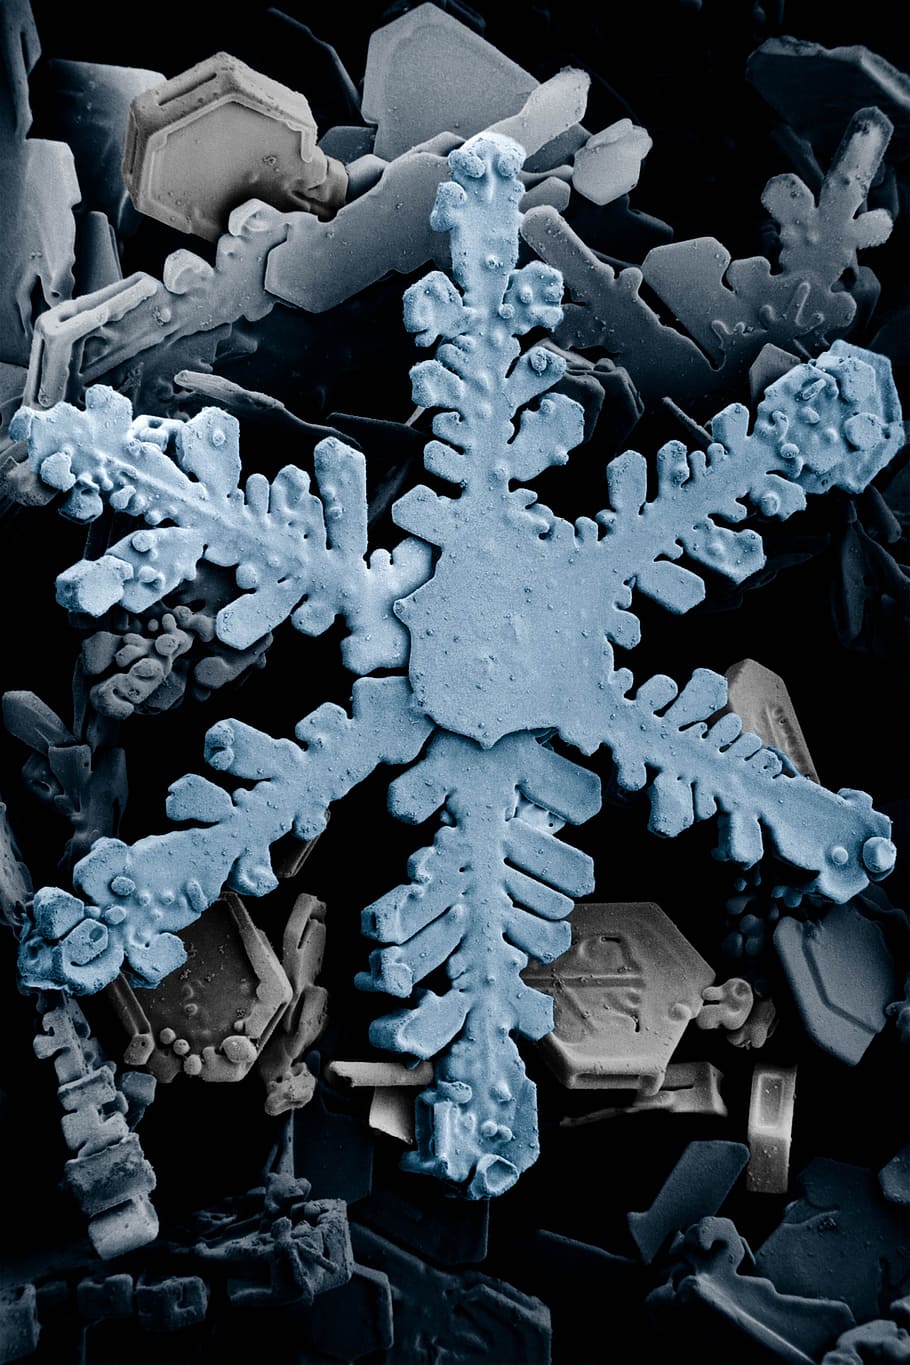 blue, snowflakes close-up photo, ice crystal, crystals, snow, ice, snow crystals, water crystals, crystal form, form